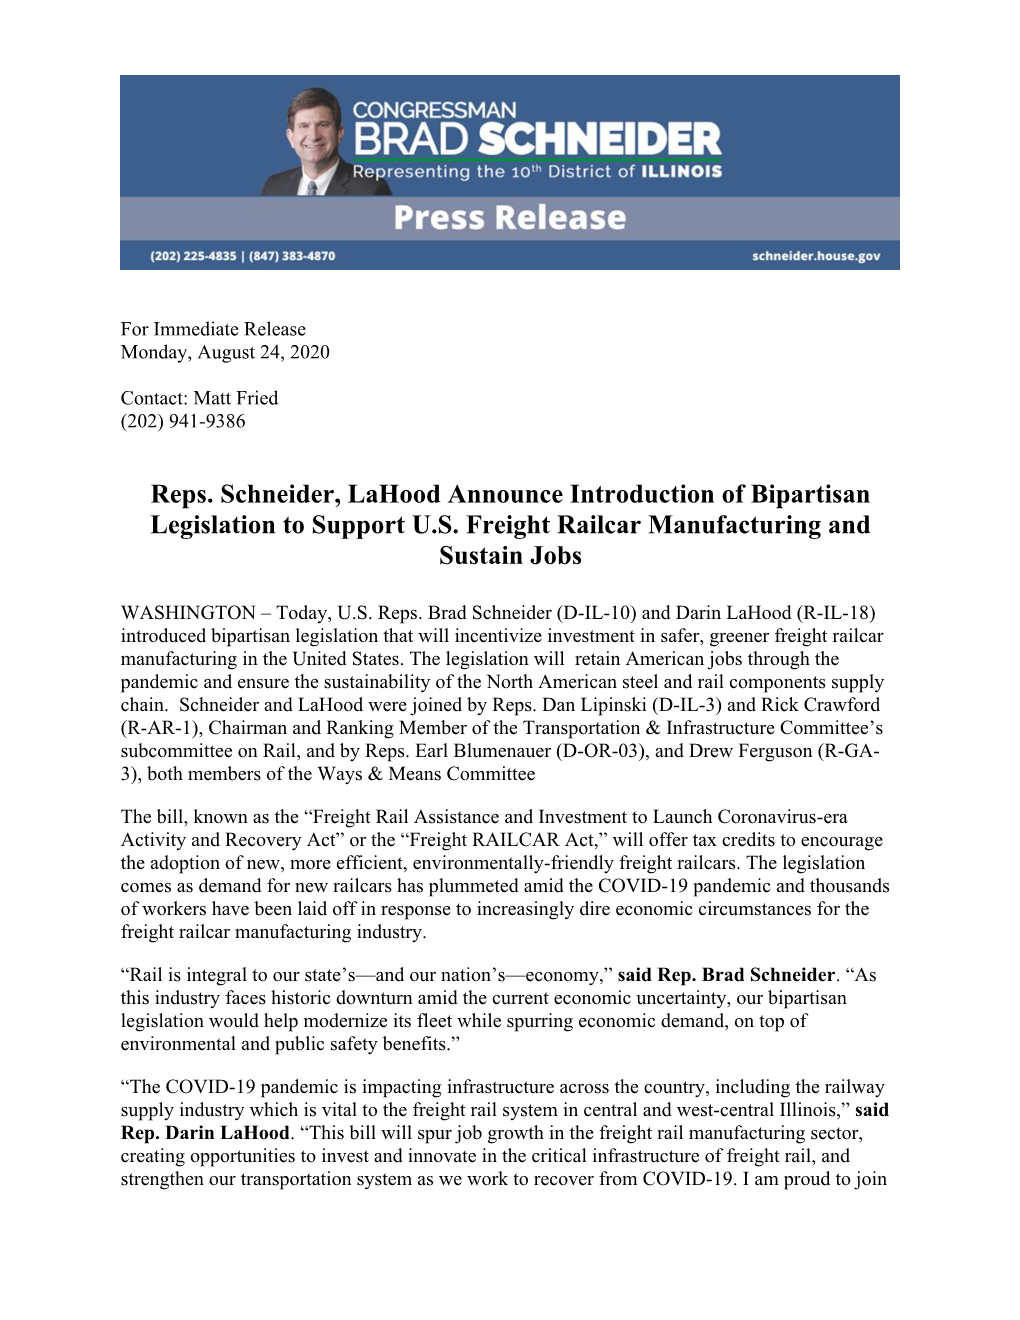 Reps. Reps. Schneider, Lahood Announce Introduction of Bipartisan Legislation to Support